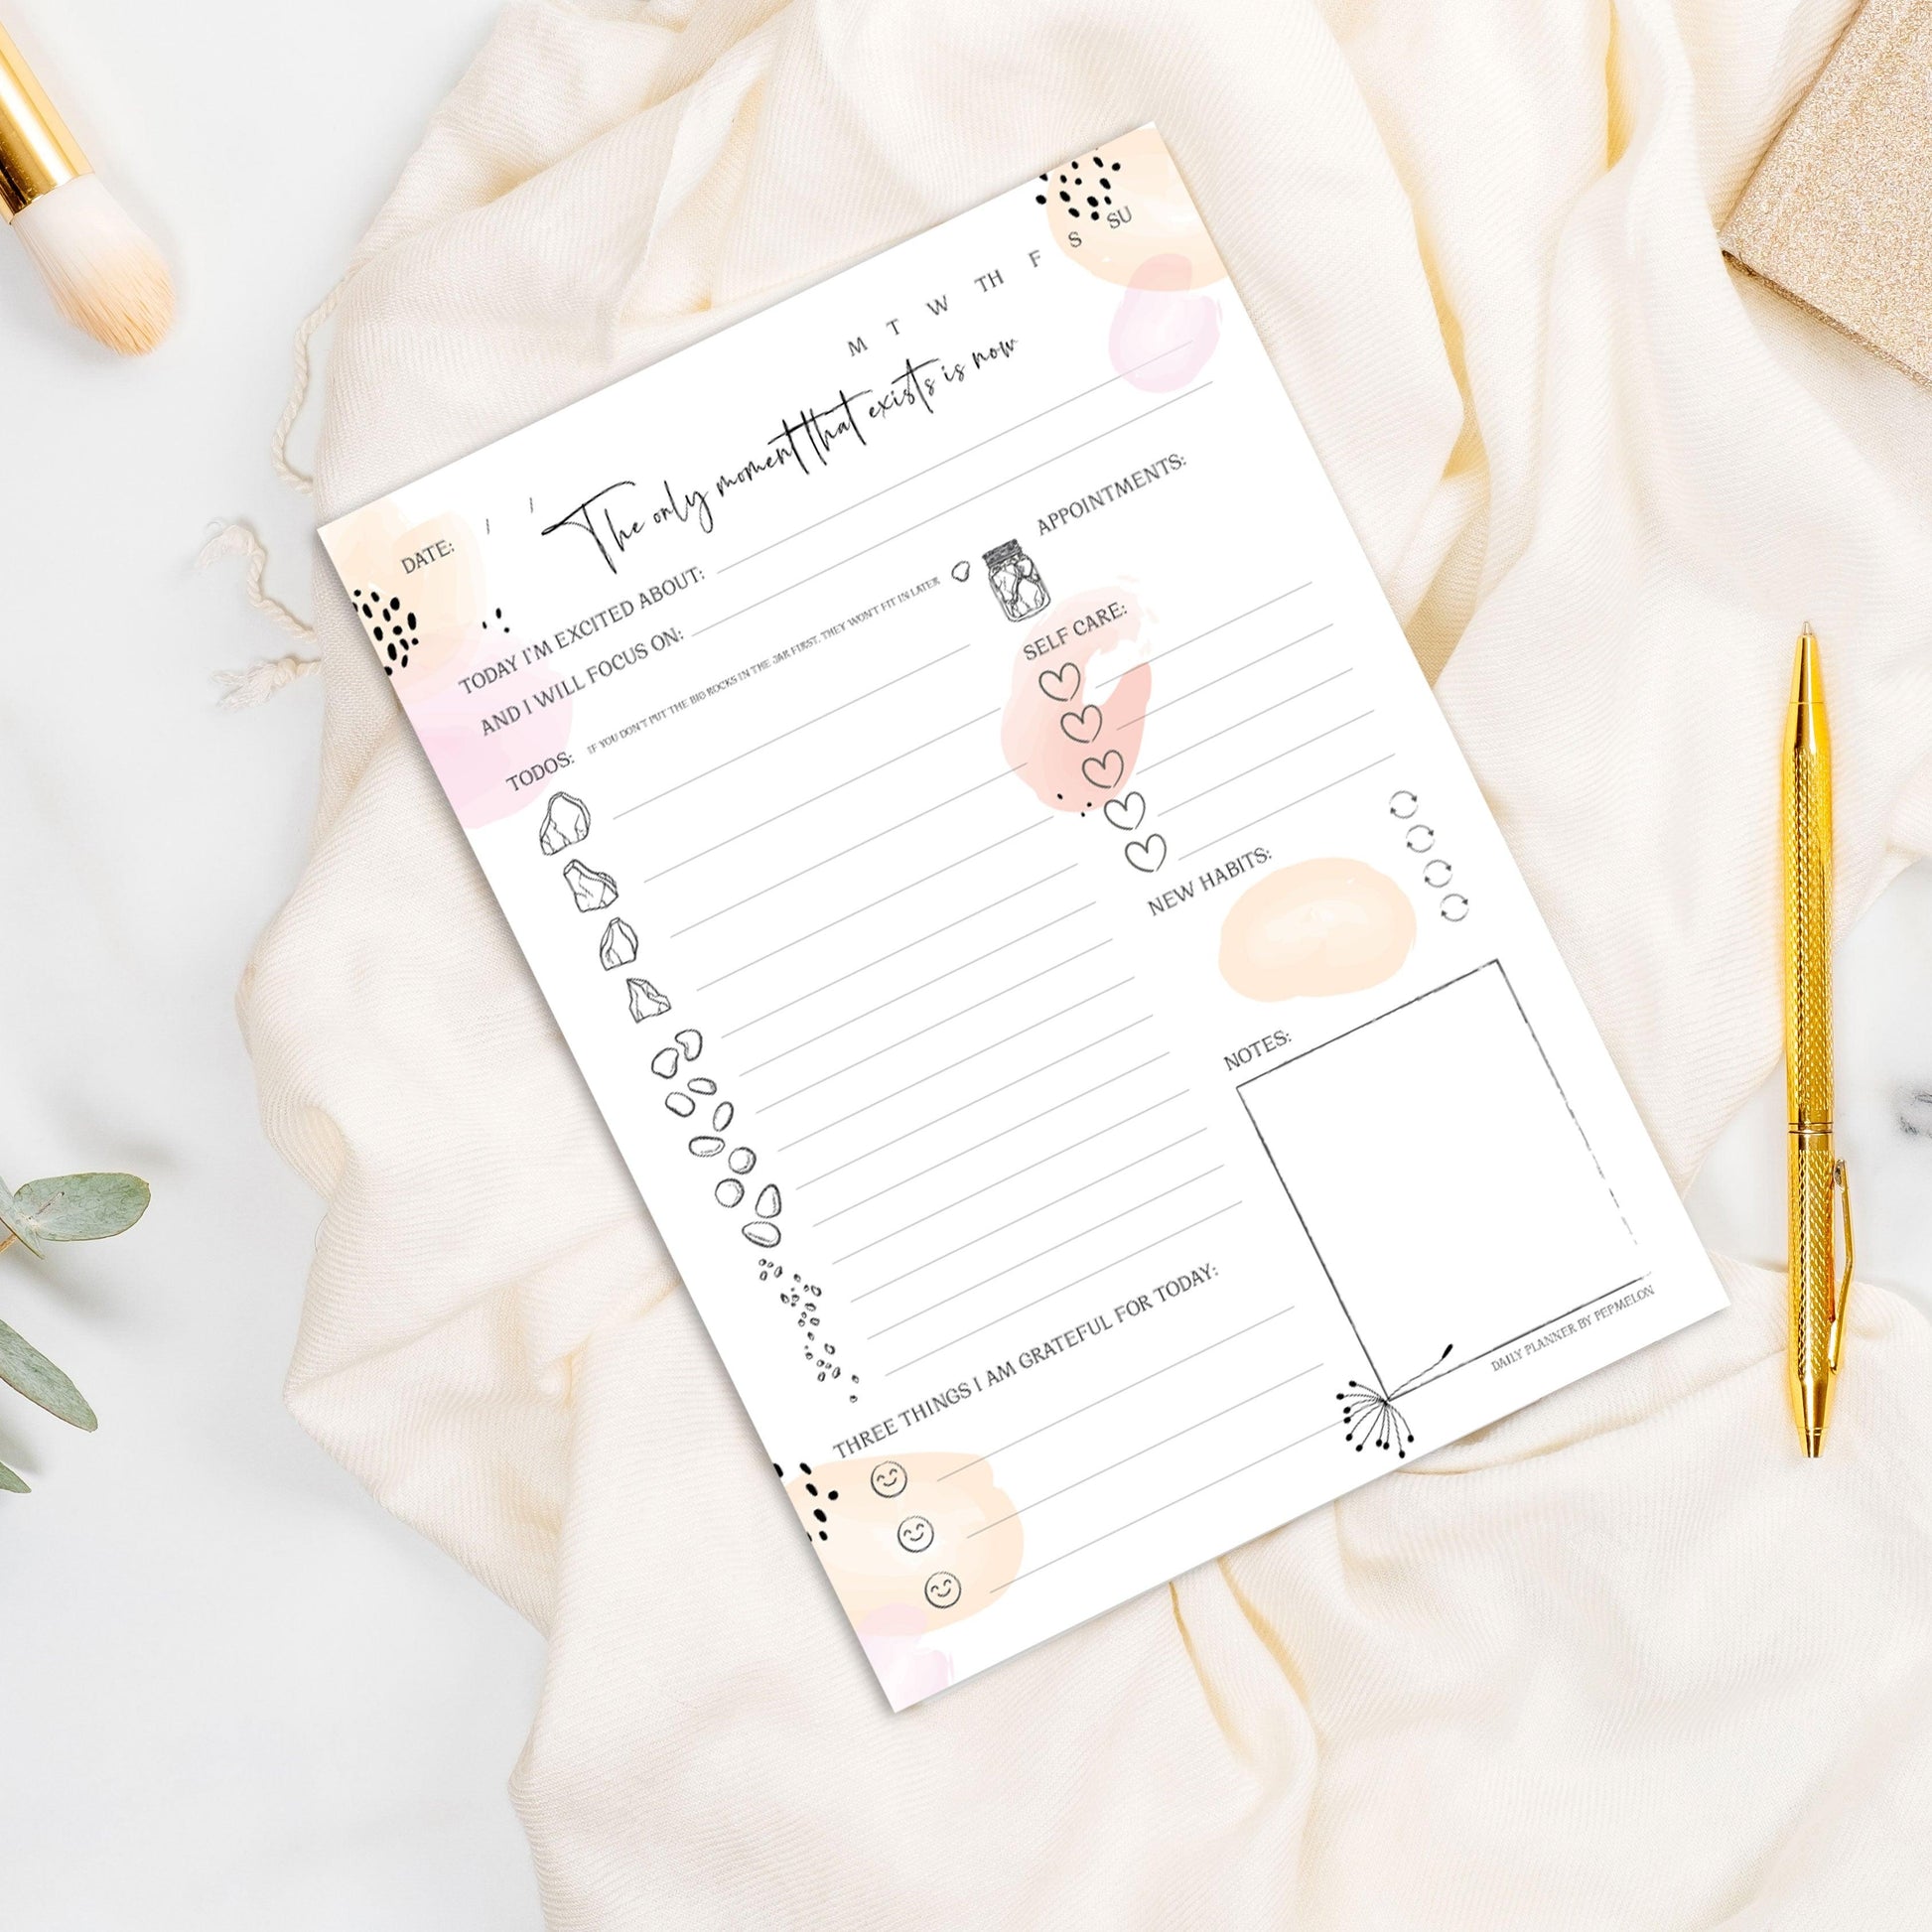 Daily planner printable for 2022, To Do List, Habit tracker - PepMelon